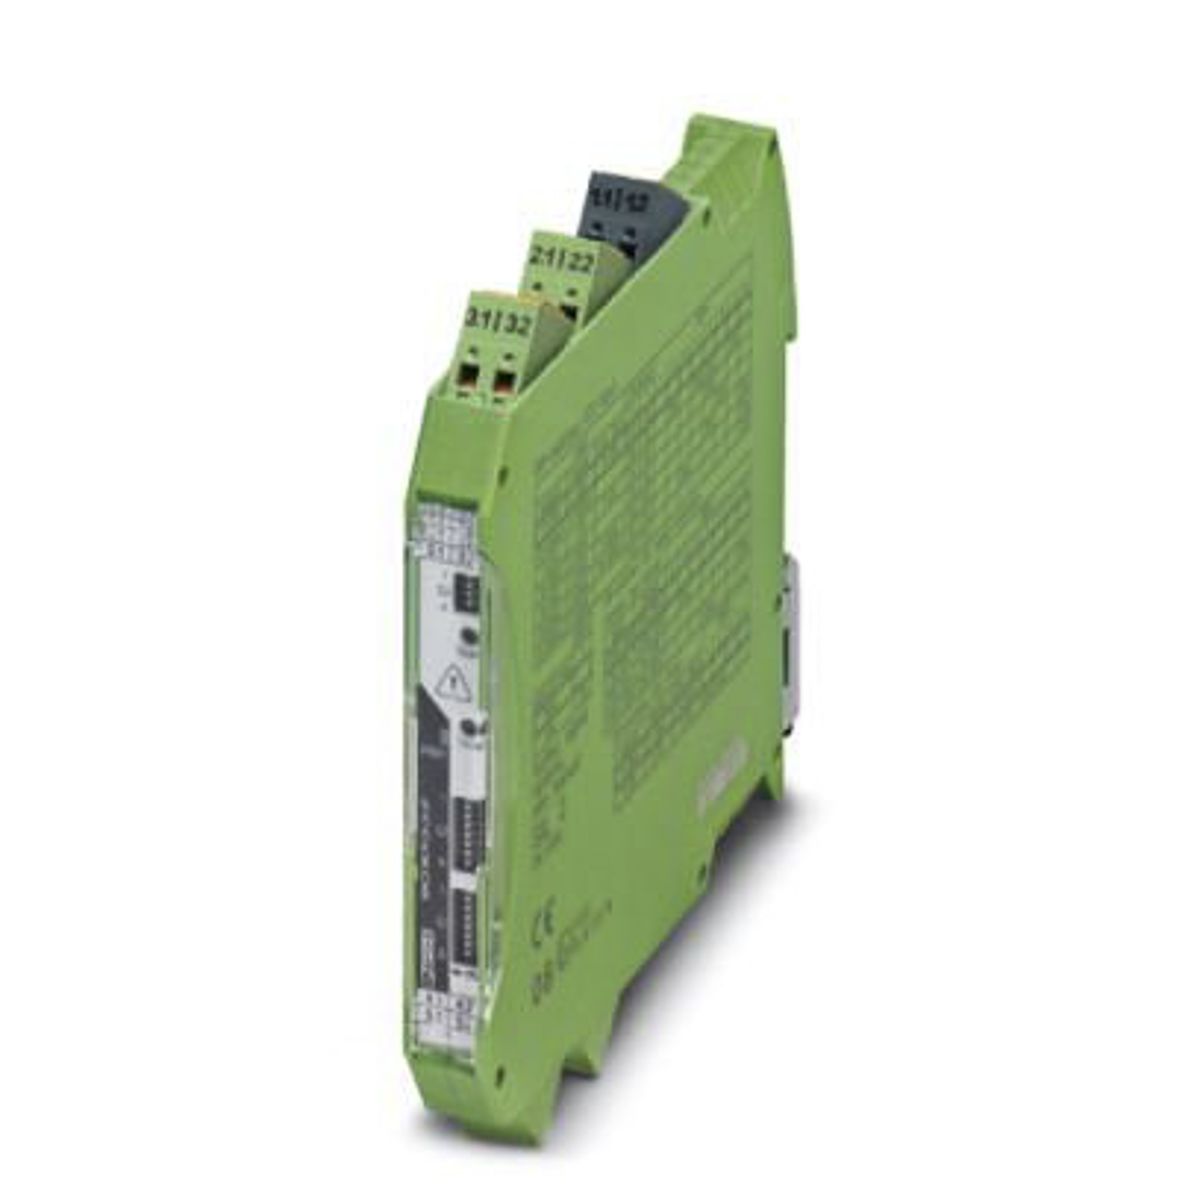 Phoenix Contact 1 Channel Galvanic Barrier, Isolating Amplifier, Current, Voltage Input, Current, Voltage Output, ATEX